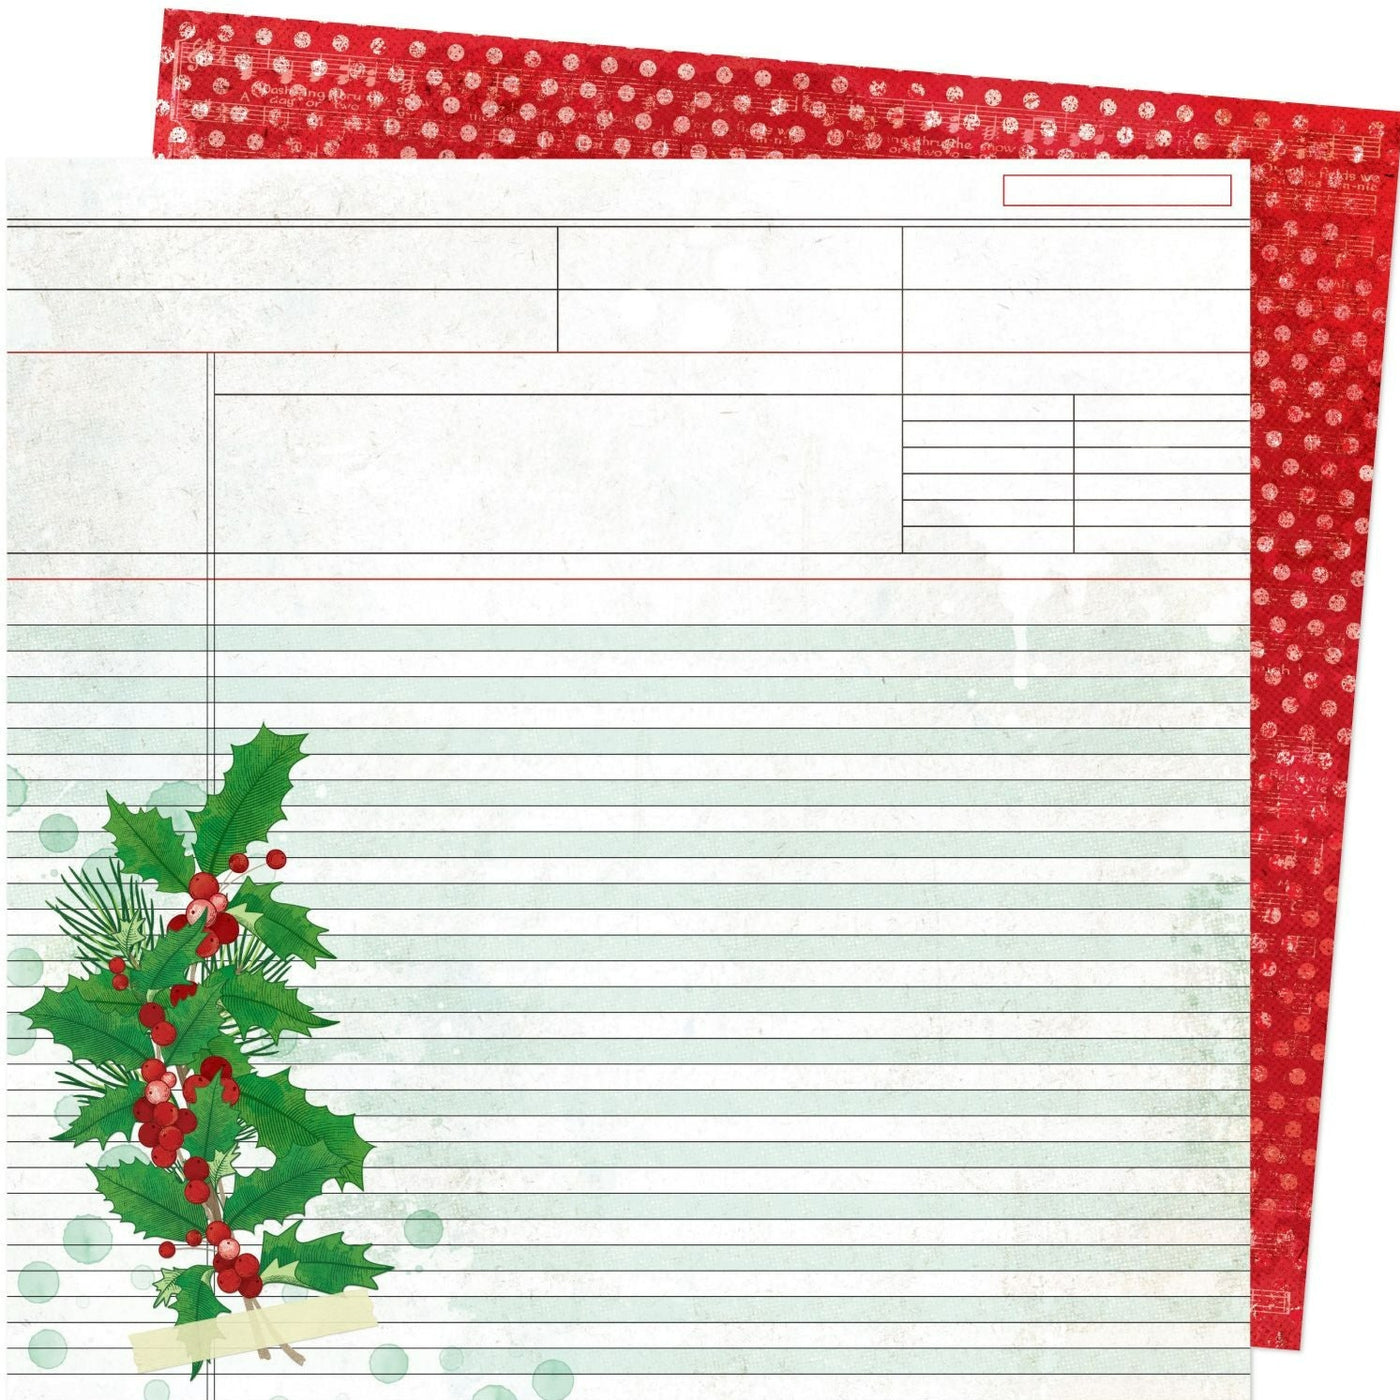 (Side A - blank ledger paper with holly & berries sprig on the left bottom corner, Side B - distressed pink polka-dots on a red background)